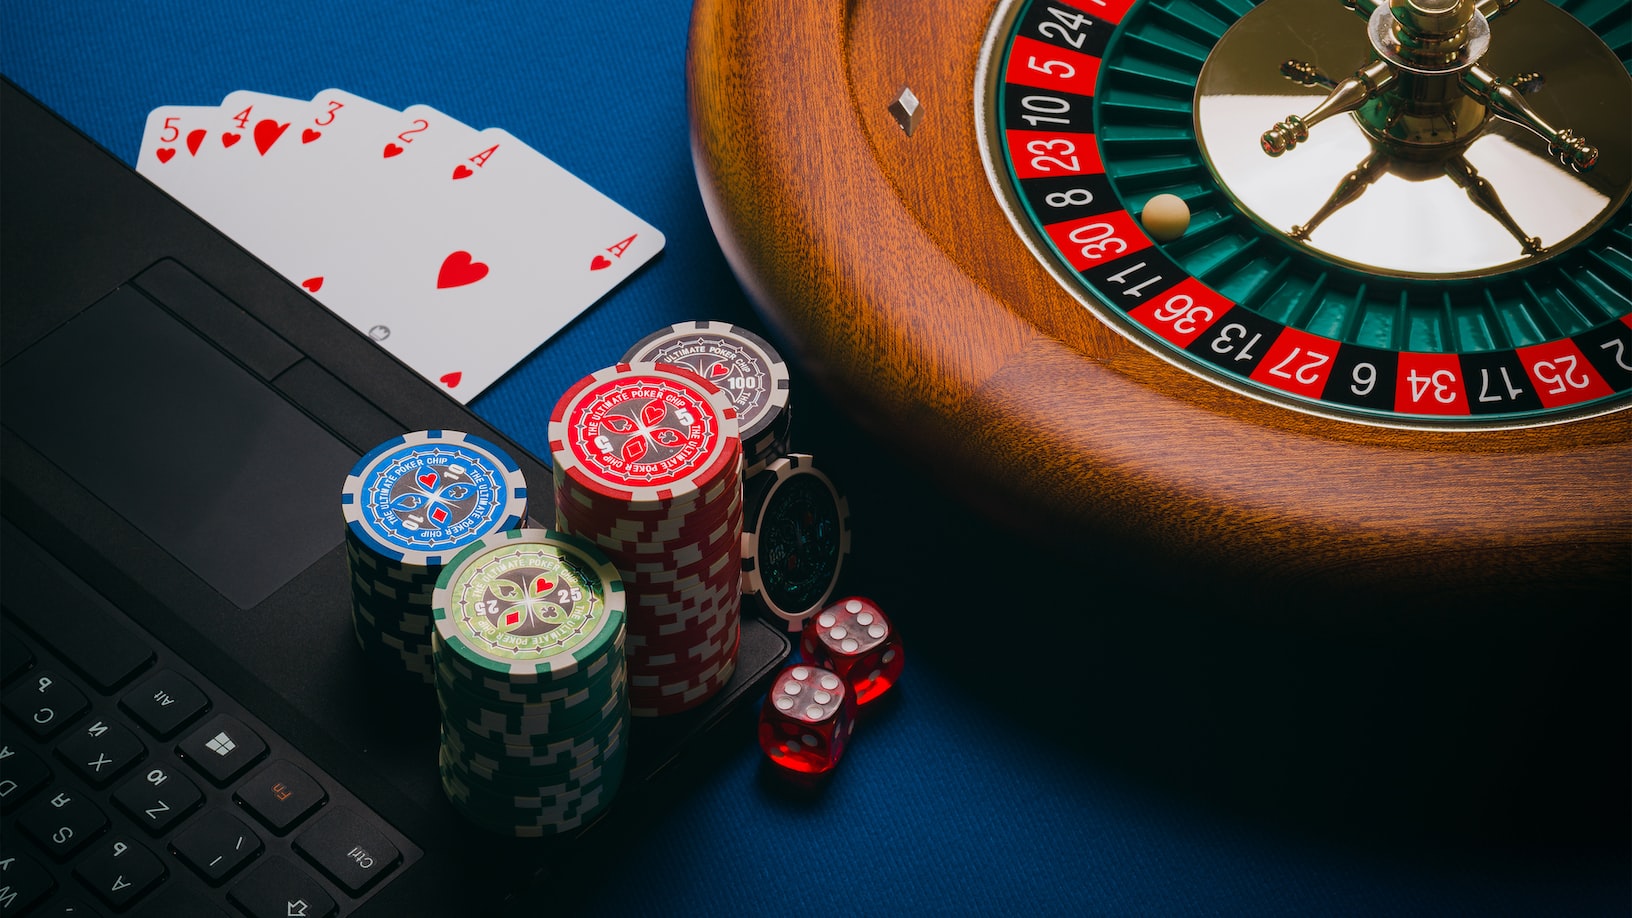 The Risk and Reward of Online Gambling vs. The Casual Fun of Online Gaming